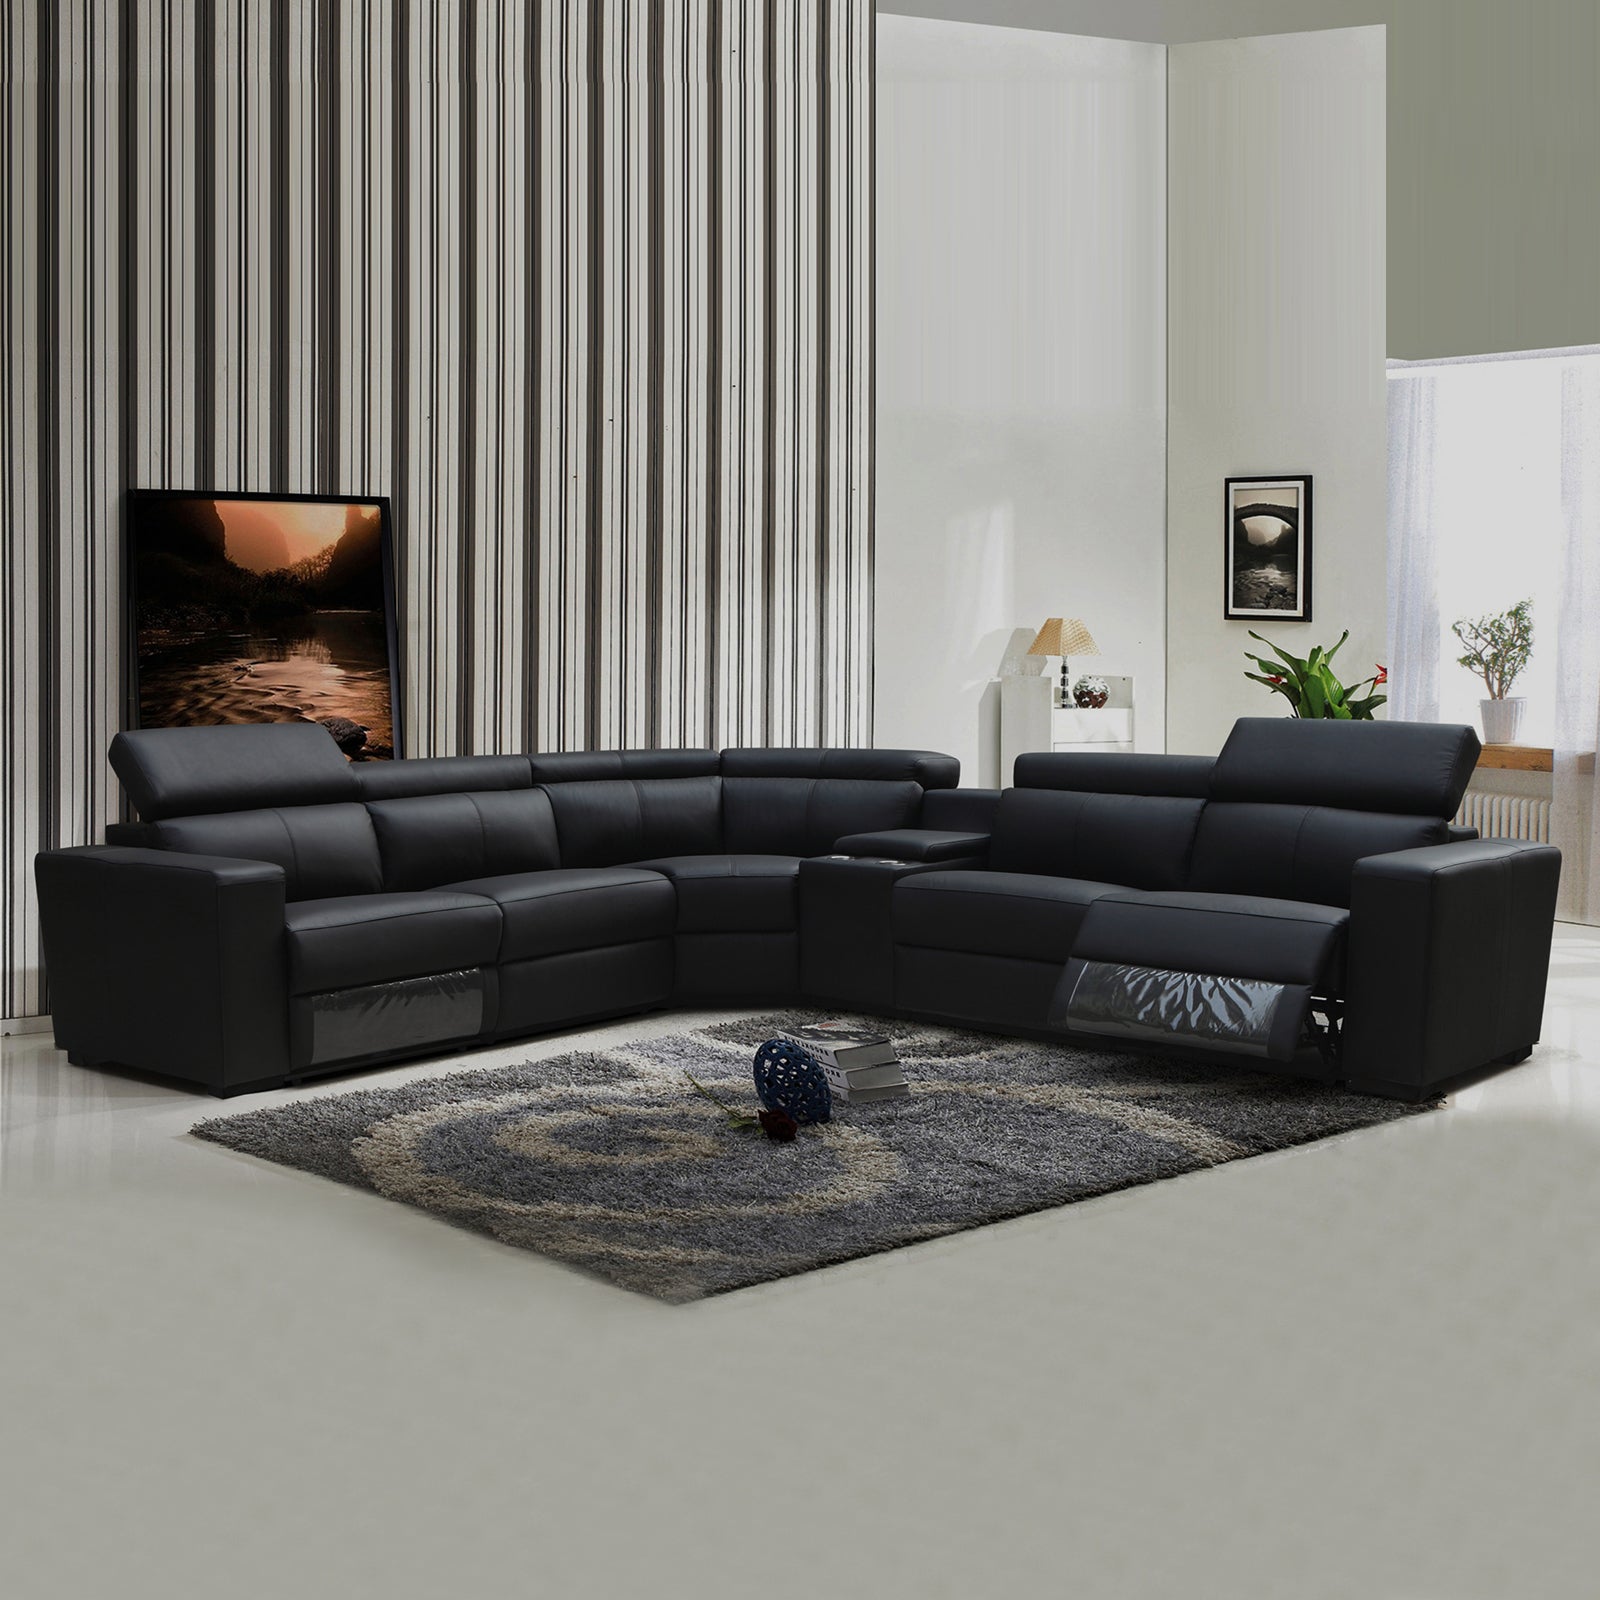 6 Seater Real Later sofa Black Color Lounge Set for Living Room Couch with Adjustable Headrest